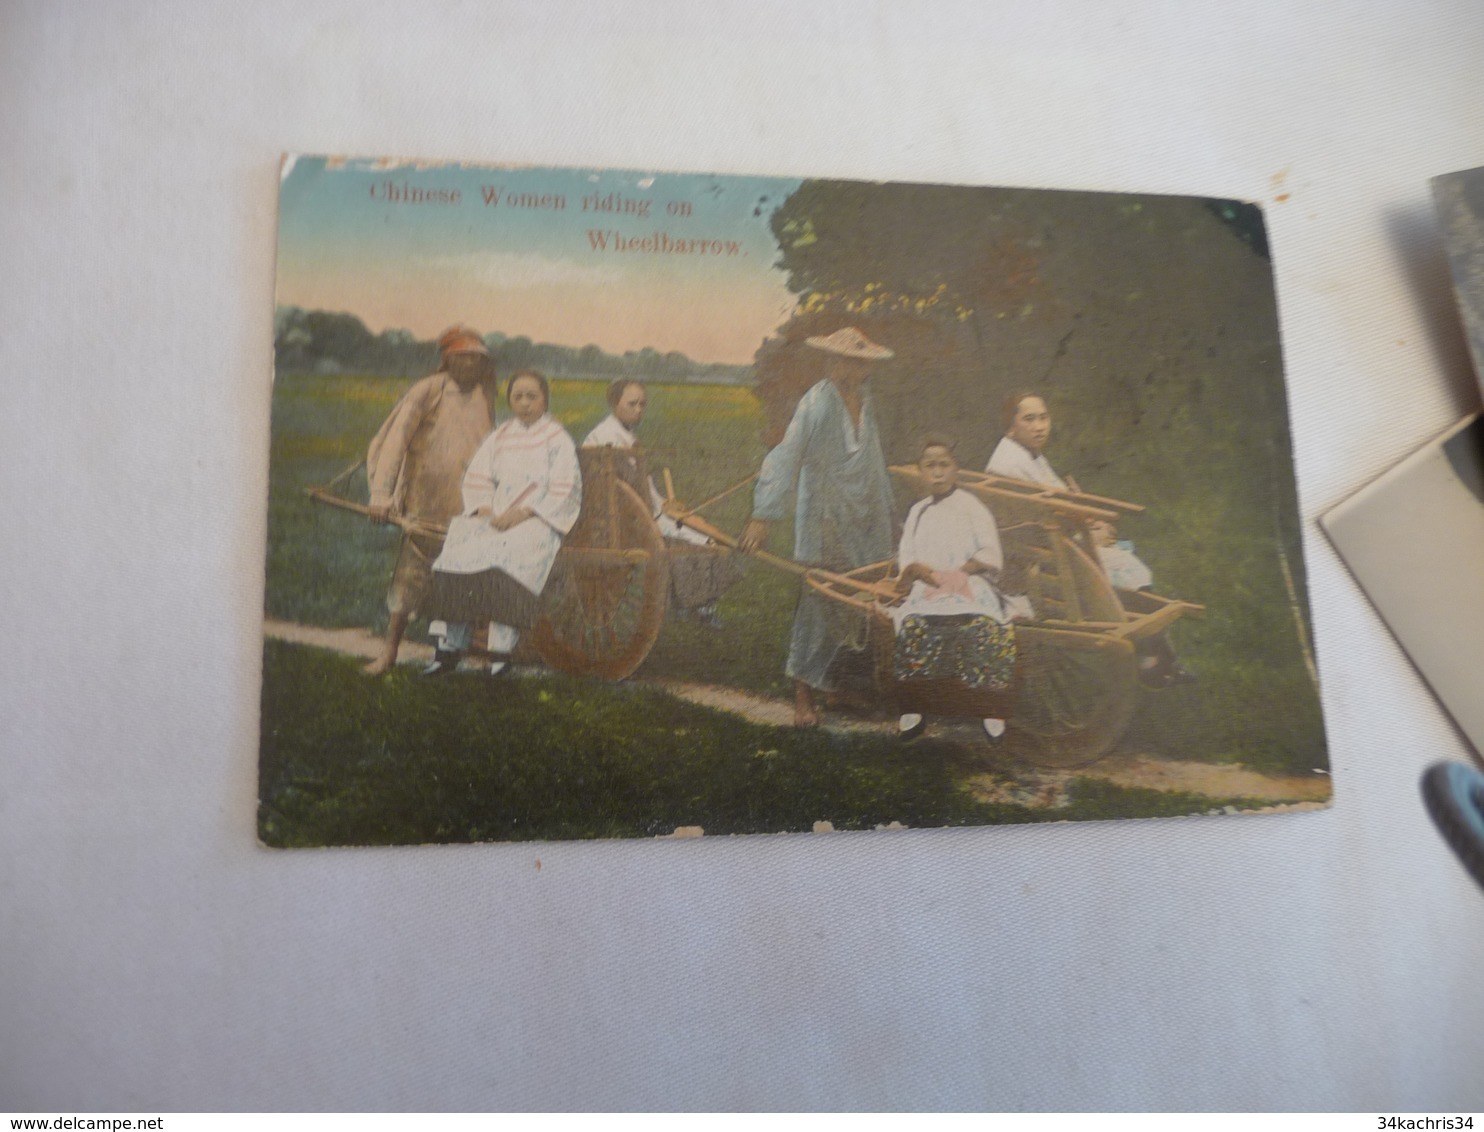 CPA Chine China Chinese Wnd On Wheelbarrow  Not In Good Condition  Paypal Ok Out Of Europe - Chine